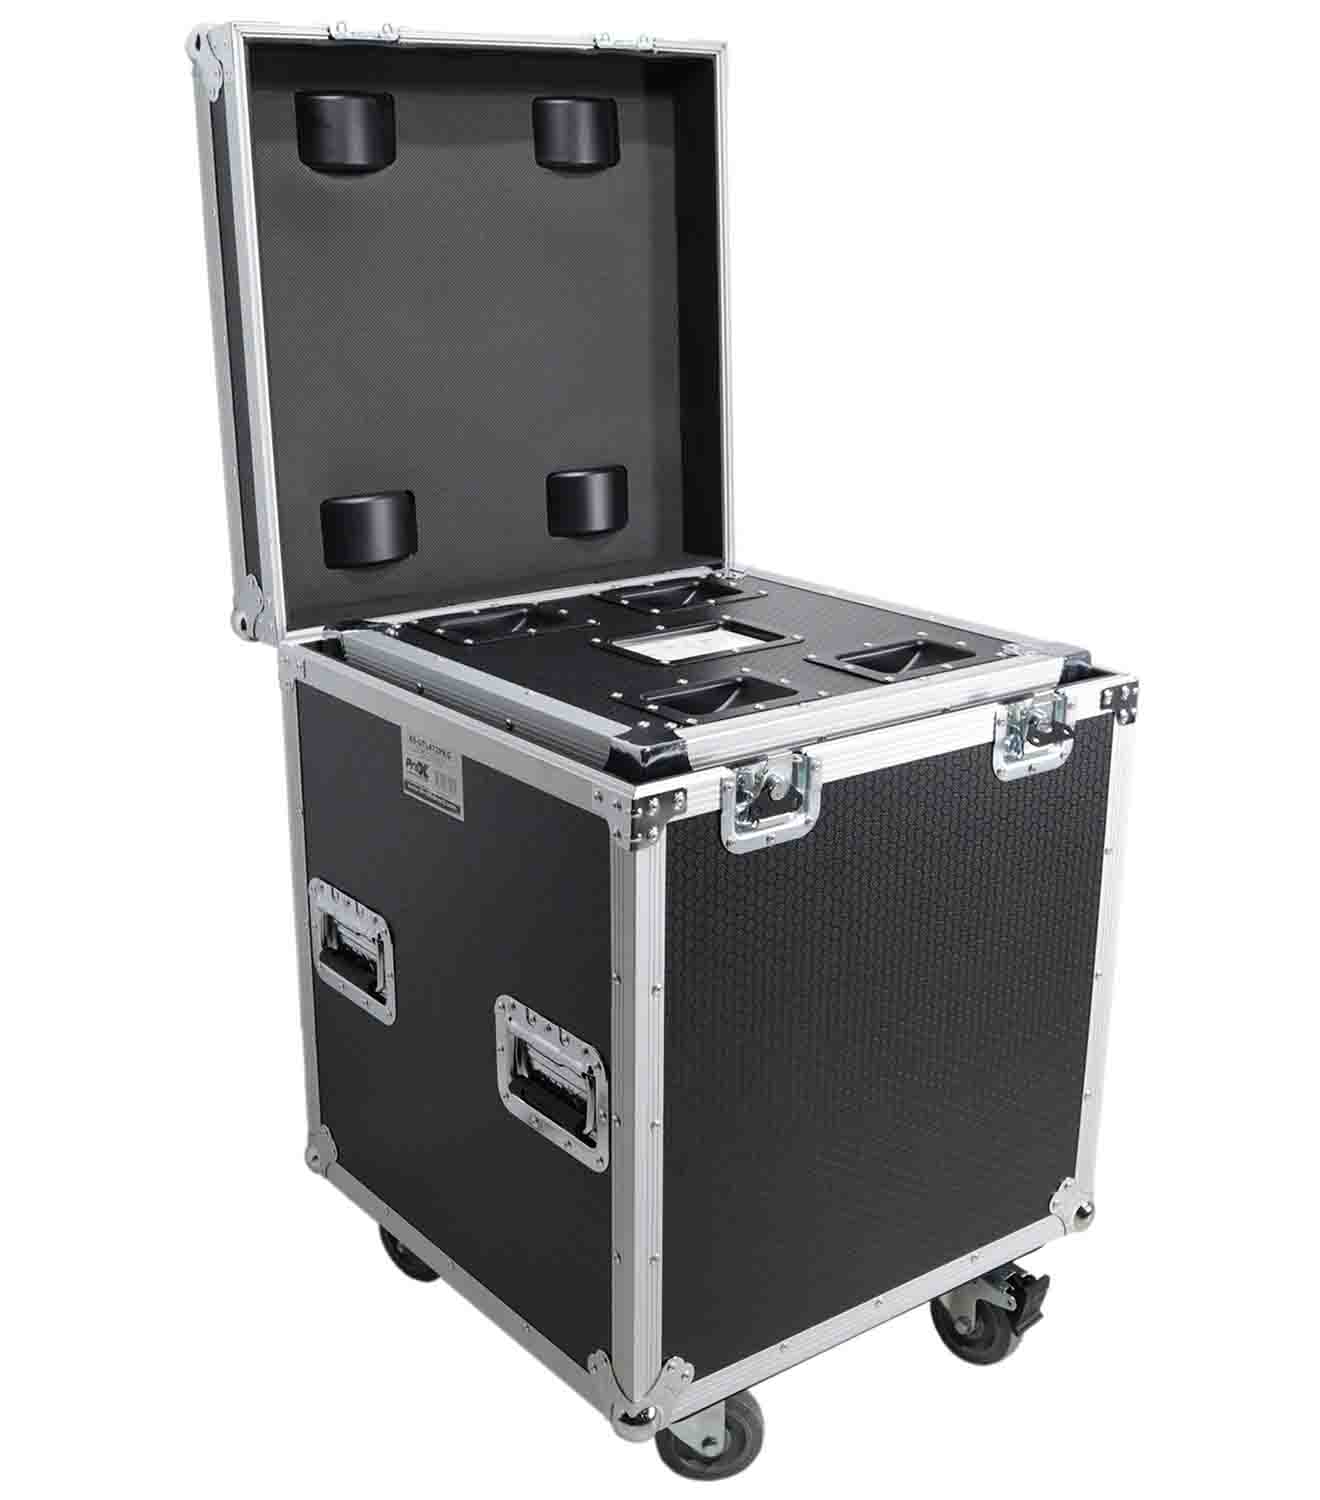 B-Stock: ProX XS-UTL49 PKG3, ATA Style Road Cases Large, Medium and Small Size with Wheels - Package of 3 - Hollywood DJ